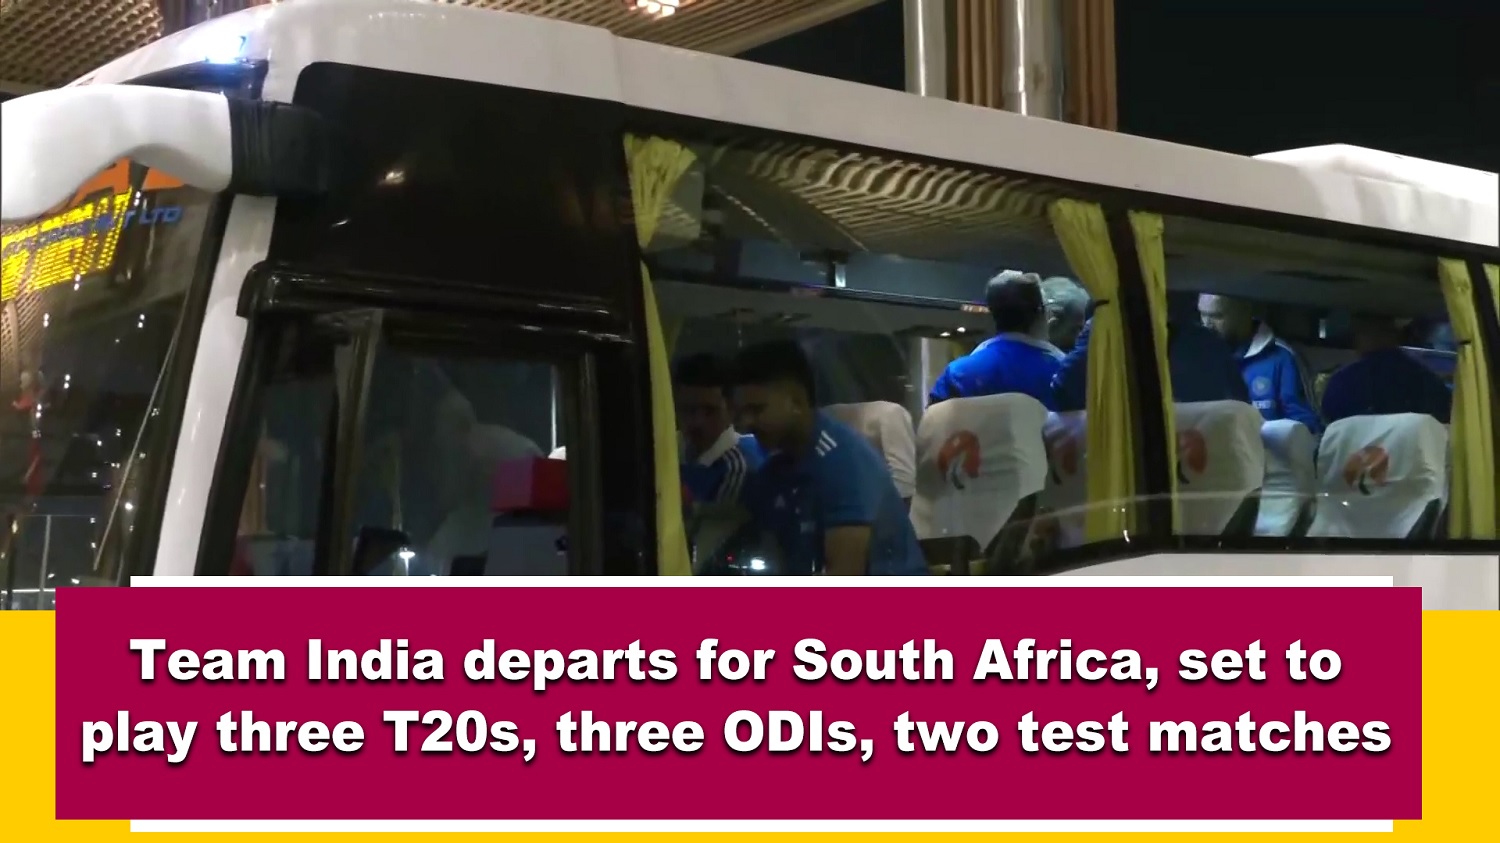 Team India departs for South Africa, set to play three T20s, three ODIs, two test matches